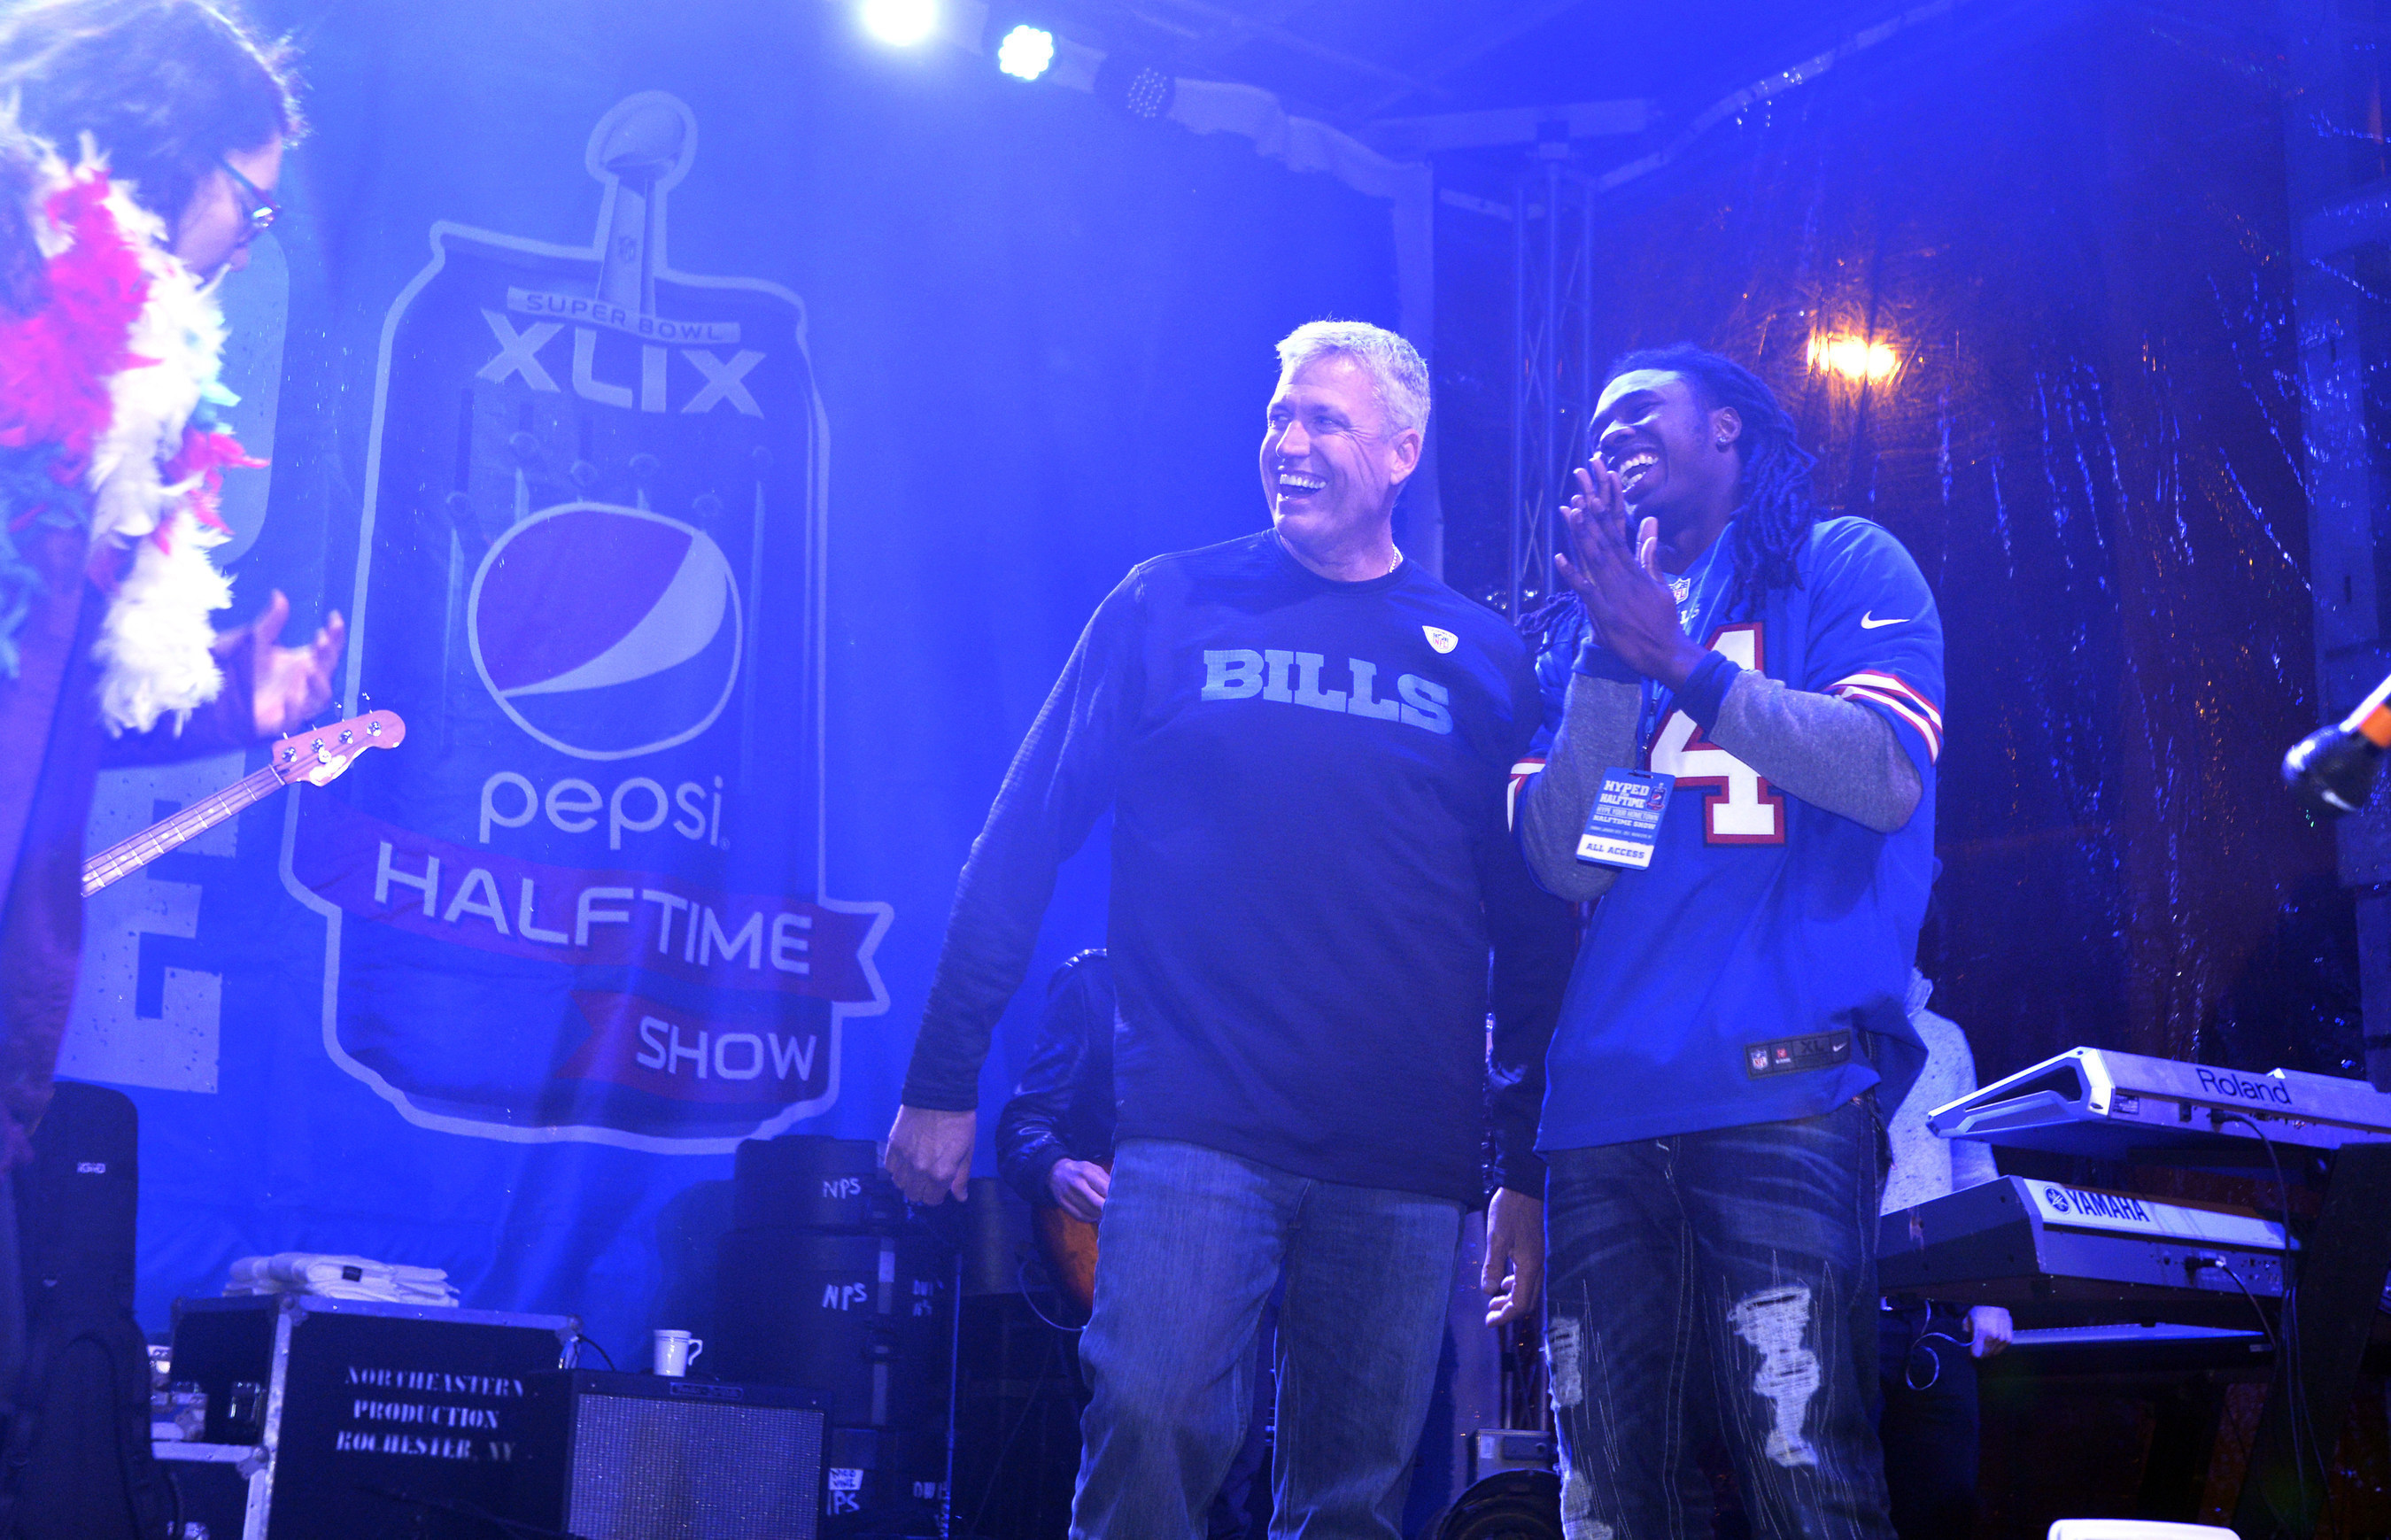 Rex Ryan, new head coach of the Buffalo Bills, and Sammy Watkins, star wide-receiver, joined America's most hyped hometown Rochester, New York for a once-in-a-lifetime halftime extravaganza to get fans hyped for the Pepsi Super Bowl Halftime Show.